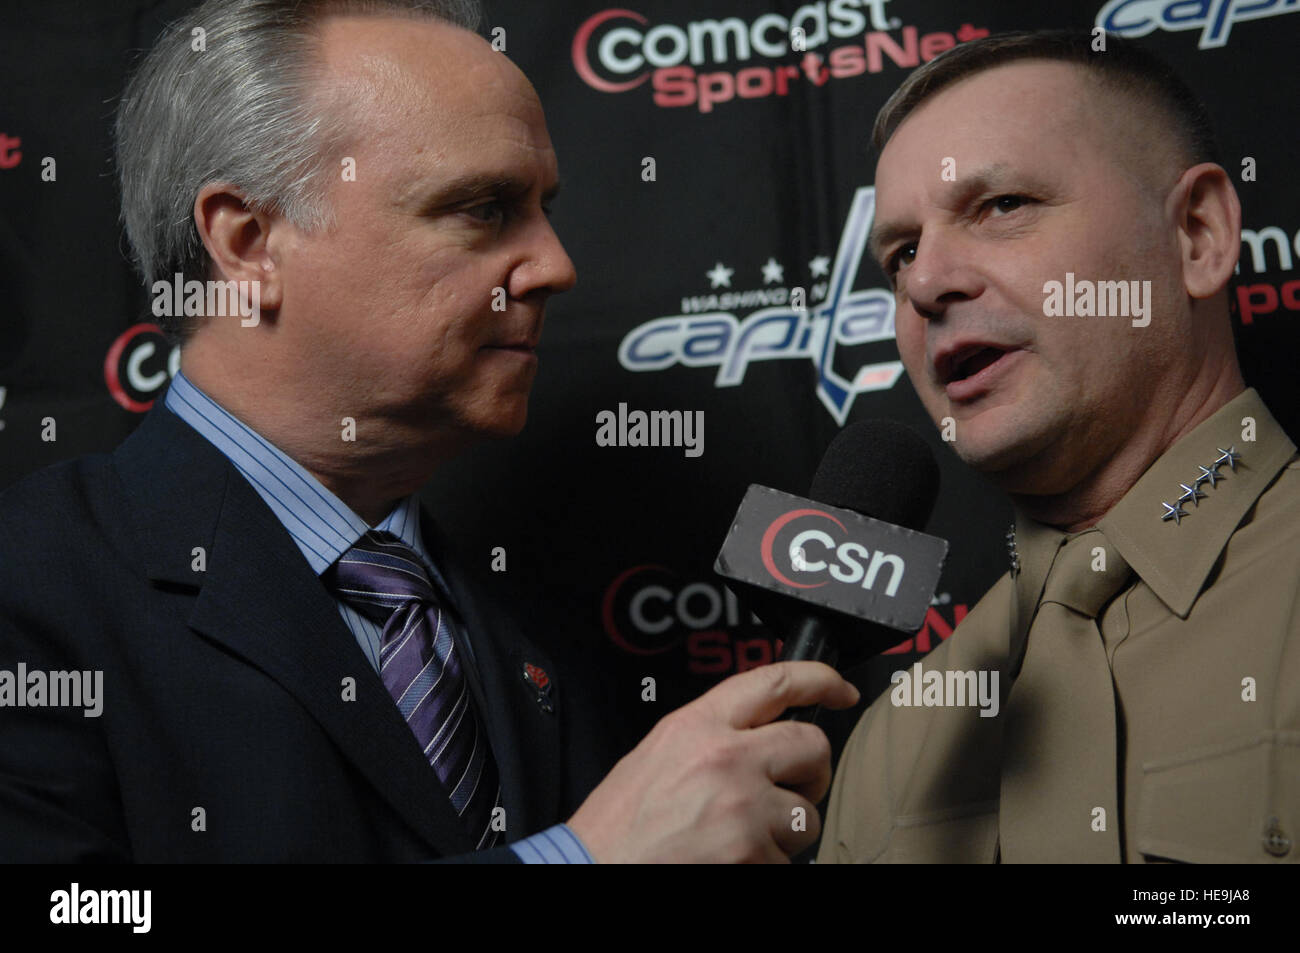 Marine Corps Gen. James E. Cartwright, vice chairman of the Joint Chiefs of Staff, gives an interview to Comcast SportsNet broadcaster Al Koken during the Washington Capitals' "Salute to the Troops" game at the Verizon Center in Washington, D.C., Feb. 20, 2008.  Cartwright and other senior defense officials watched as the Capitals lost in a shootout to the New York Islanders, 3-2.  Air Force Tech. Sgt. Adam M. Stump. (Released) Stock Photo